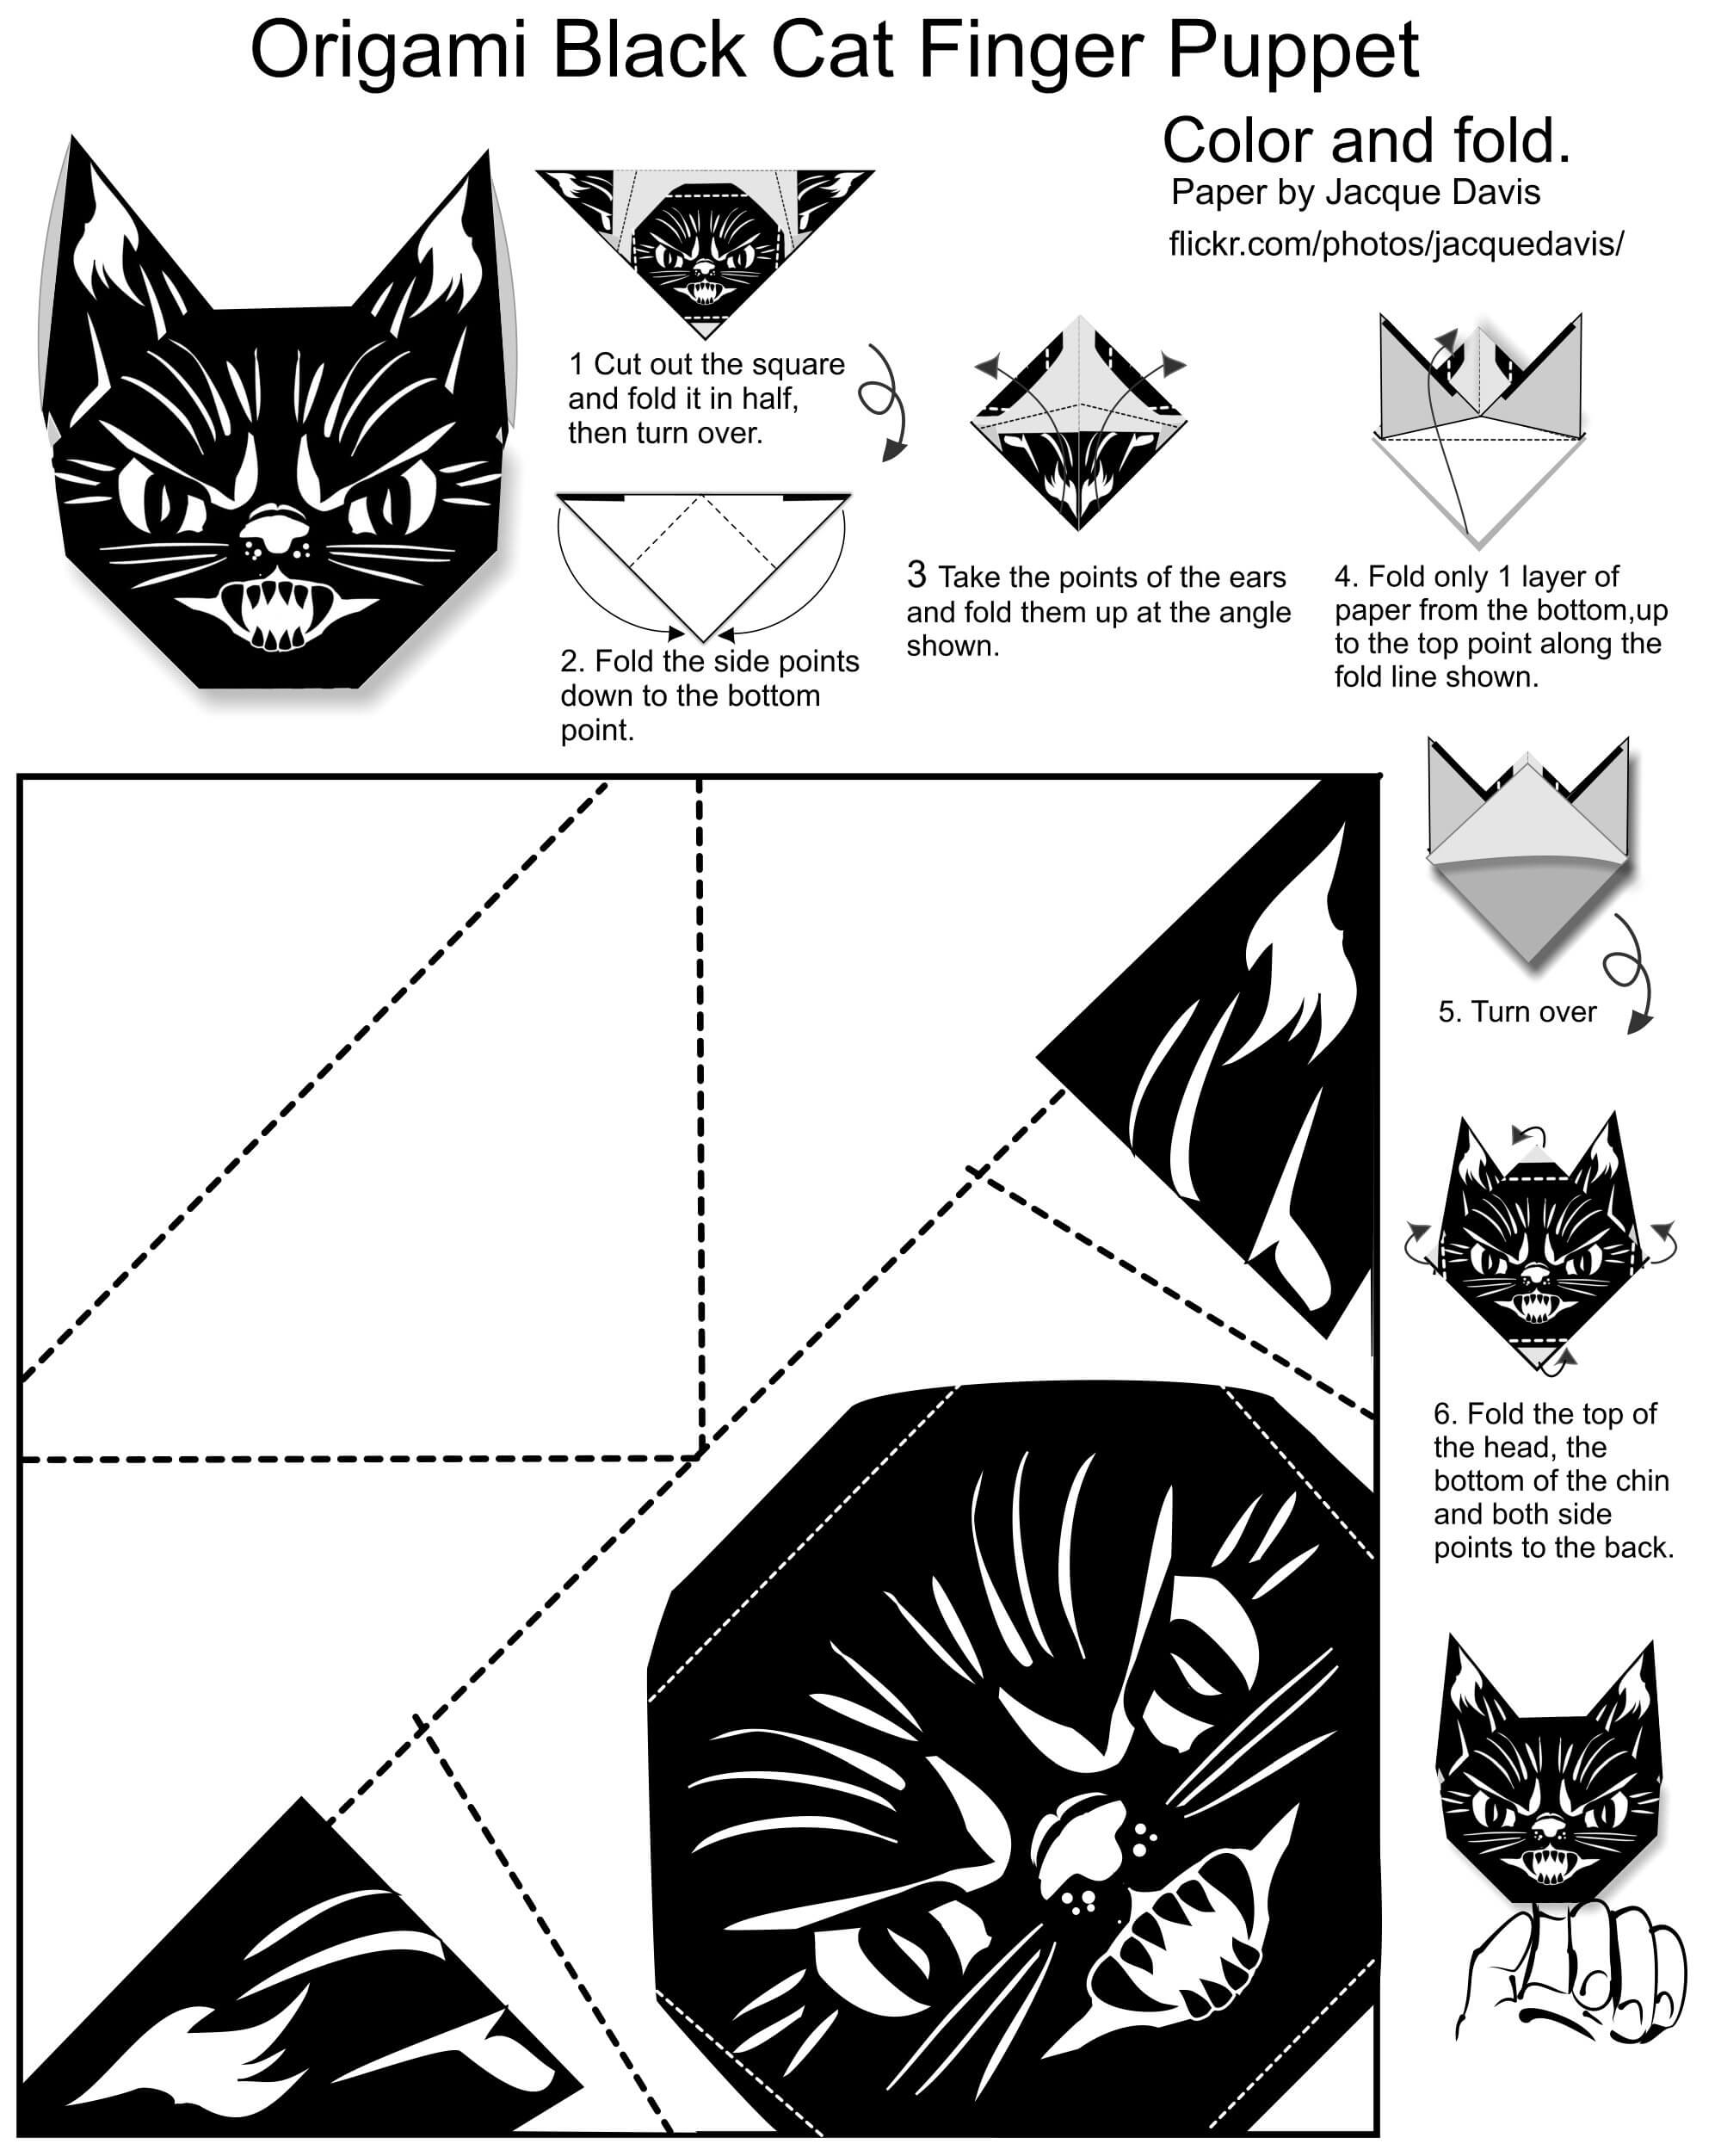 Fox Puppet Origami Origami Paper Folding Free Printable Papercraft Templates